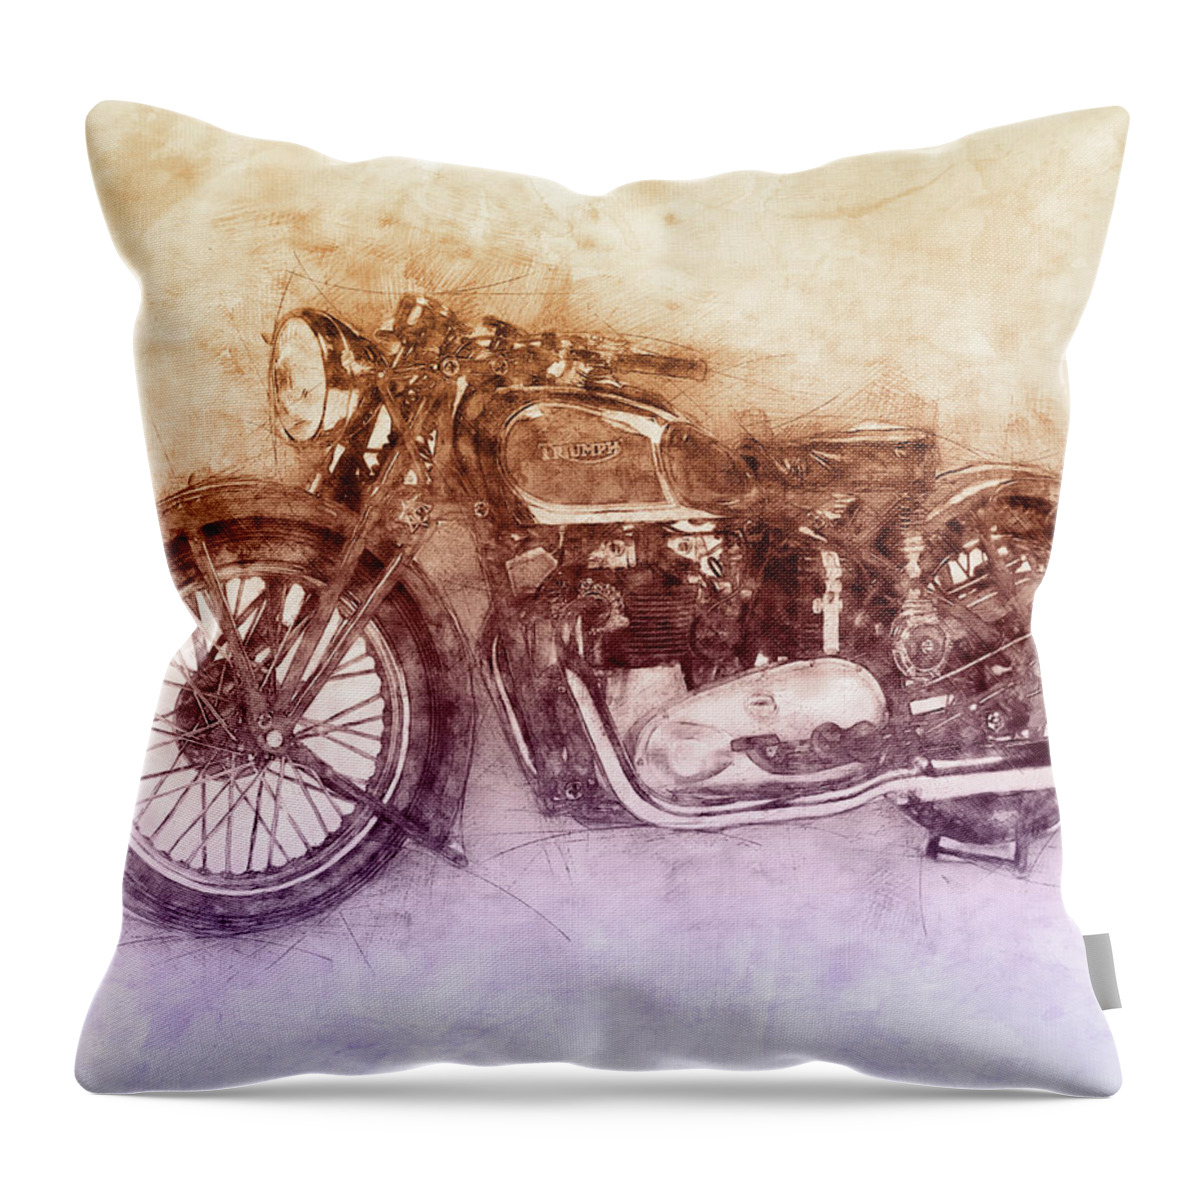 Triumph Speed Twin Throw Pillow featuring the mixed media Triumph Speed Twin 2 - 1937 - Vintage Motorcycle Poster - Automotive Art by Studio Grafiikka